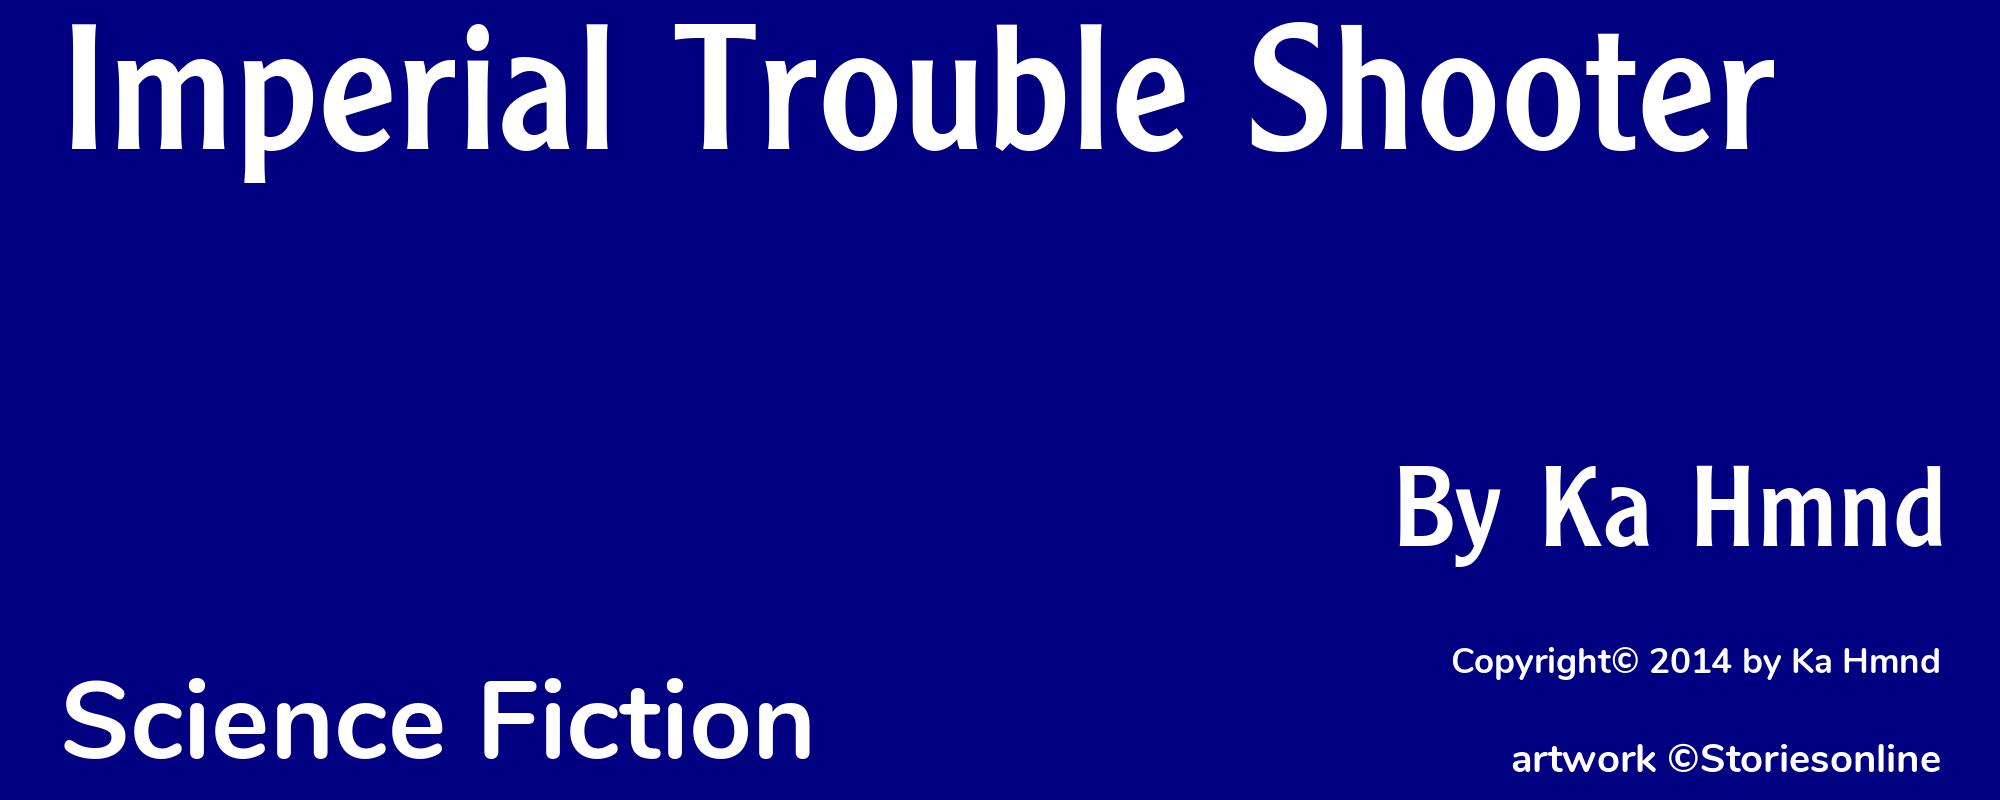 Imperial Trouble Shooter - Cover